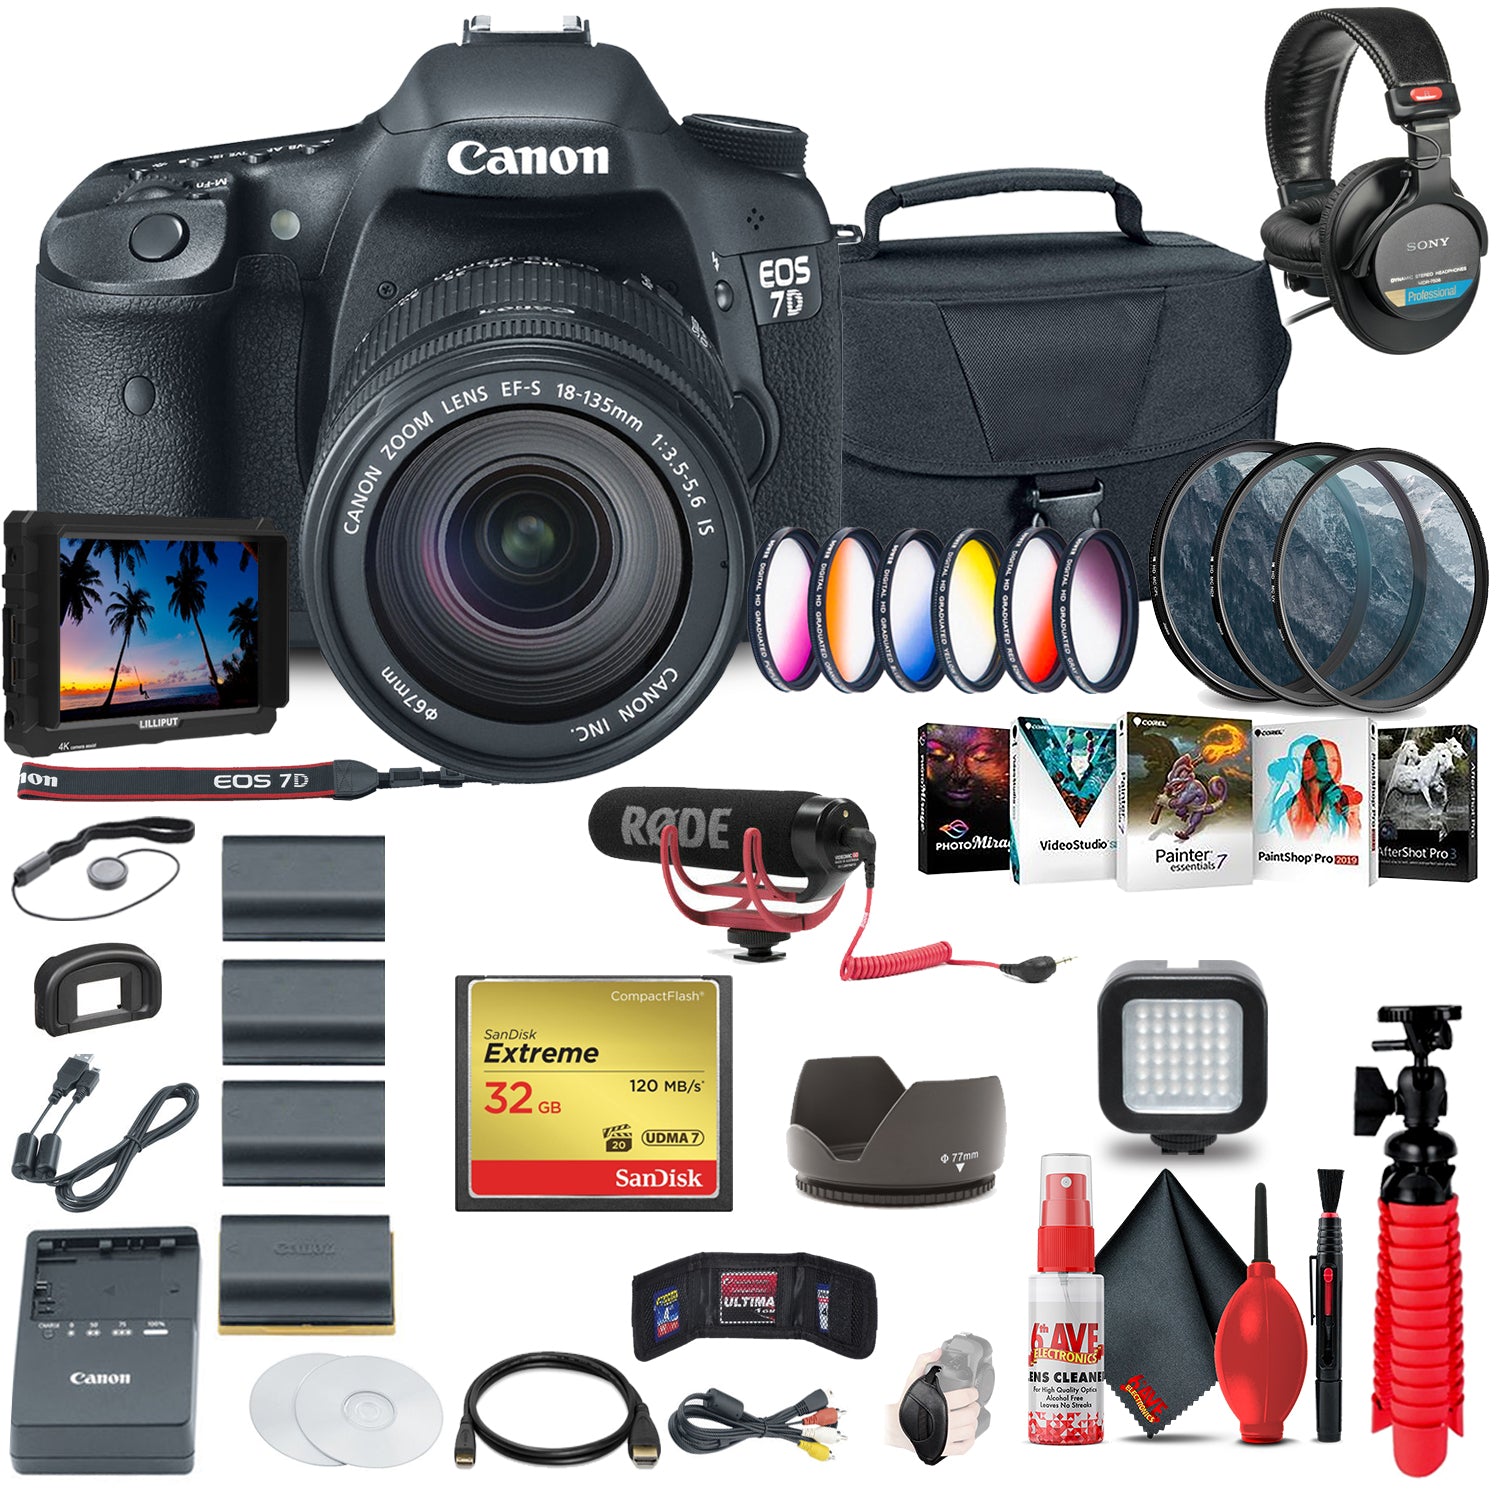 Canon EOS 7D DSLR Camera with 18-135mm Kit (3814B016) + 4K Monitor + Mic + More